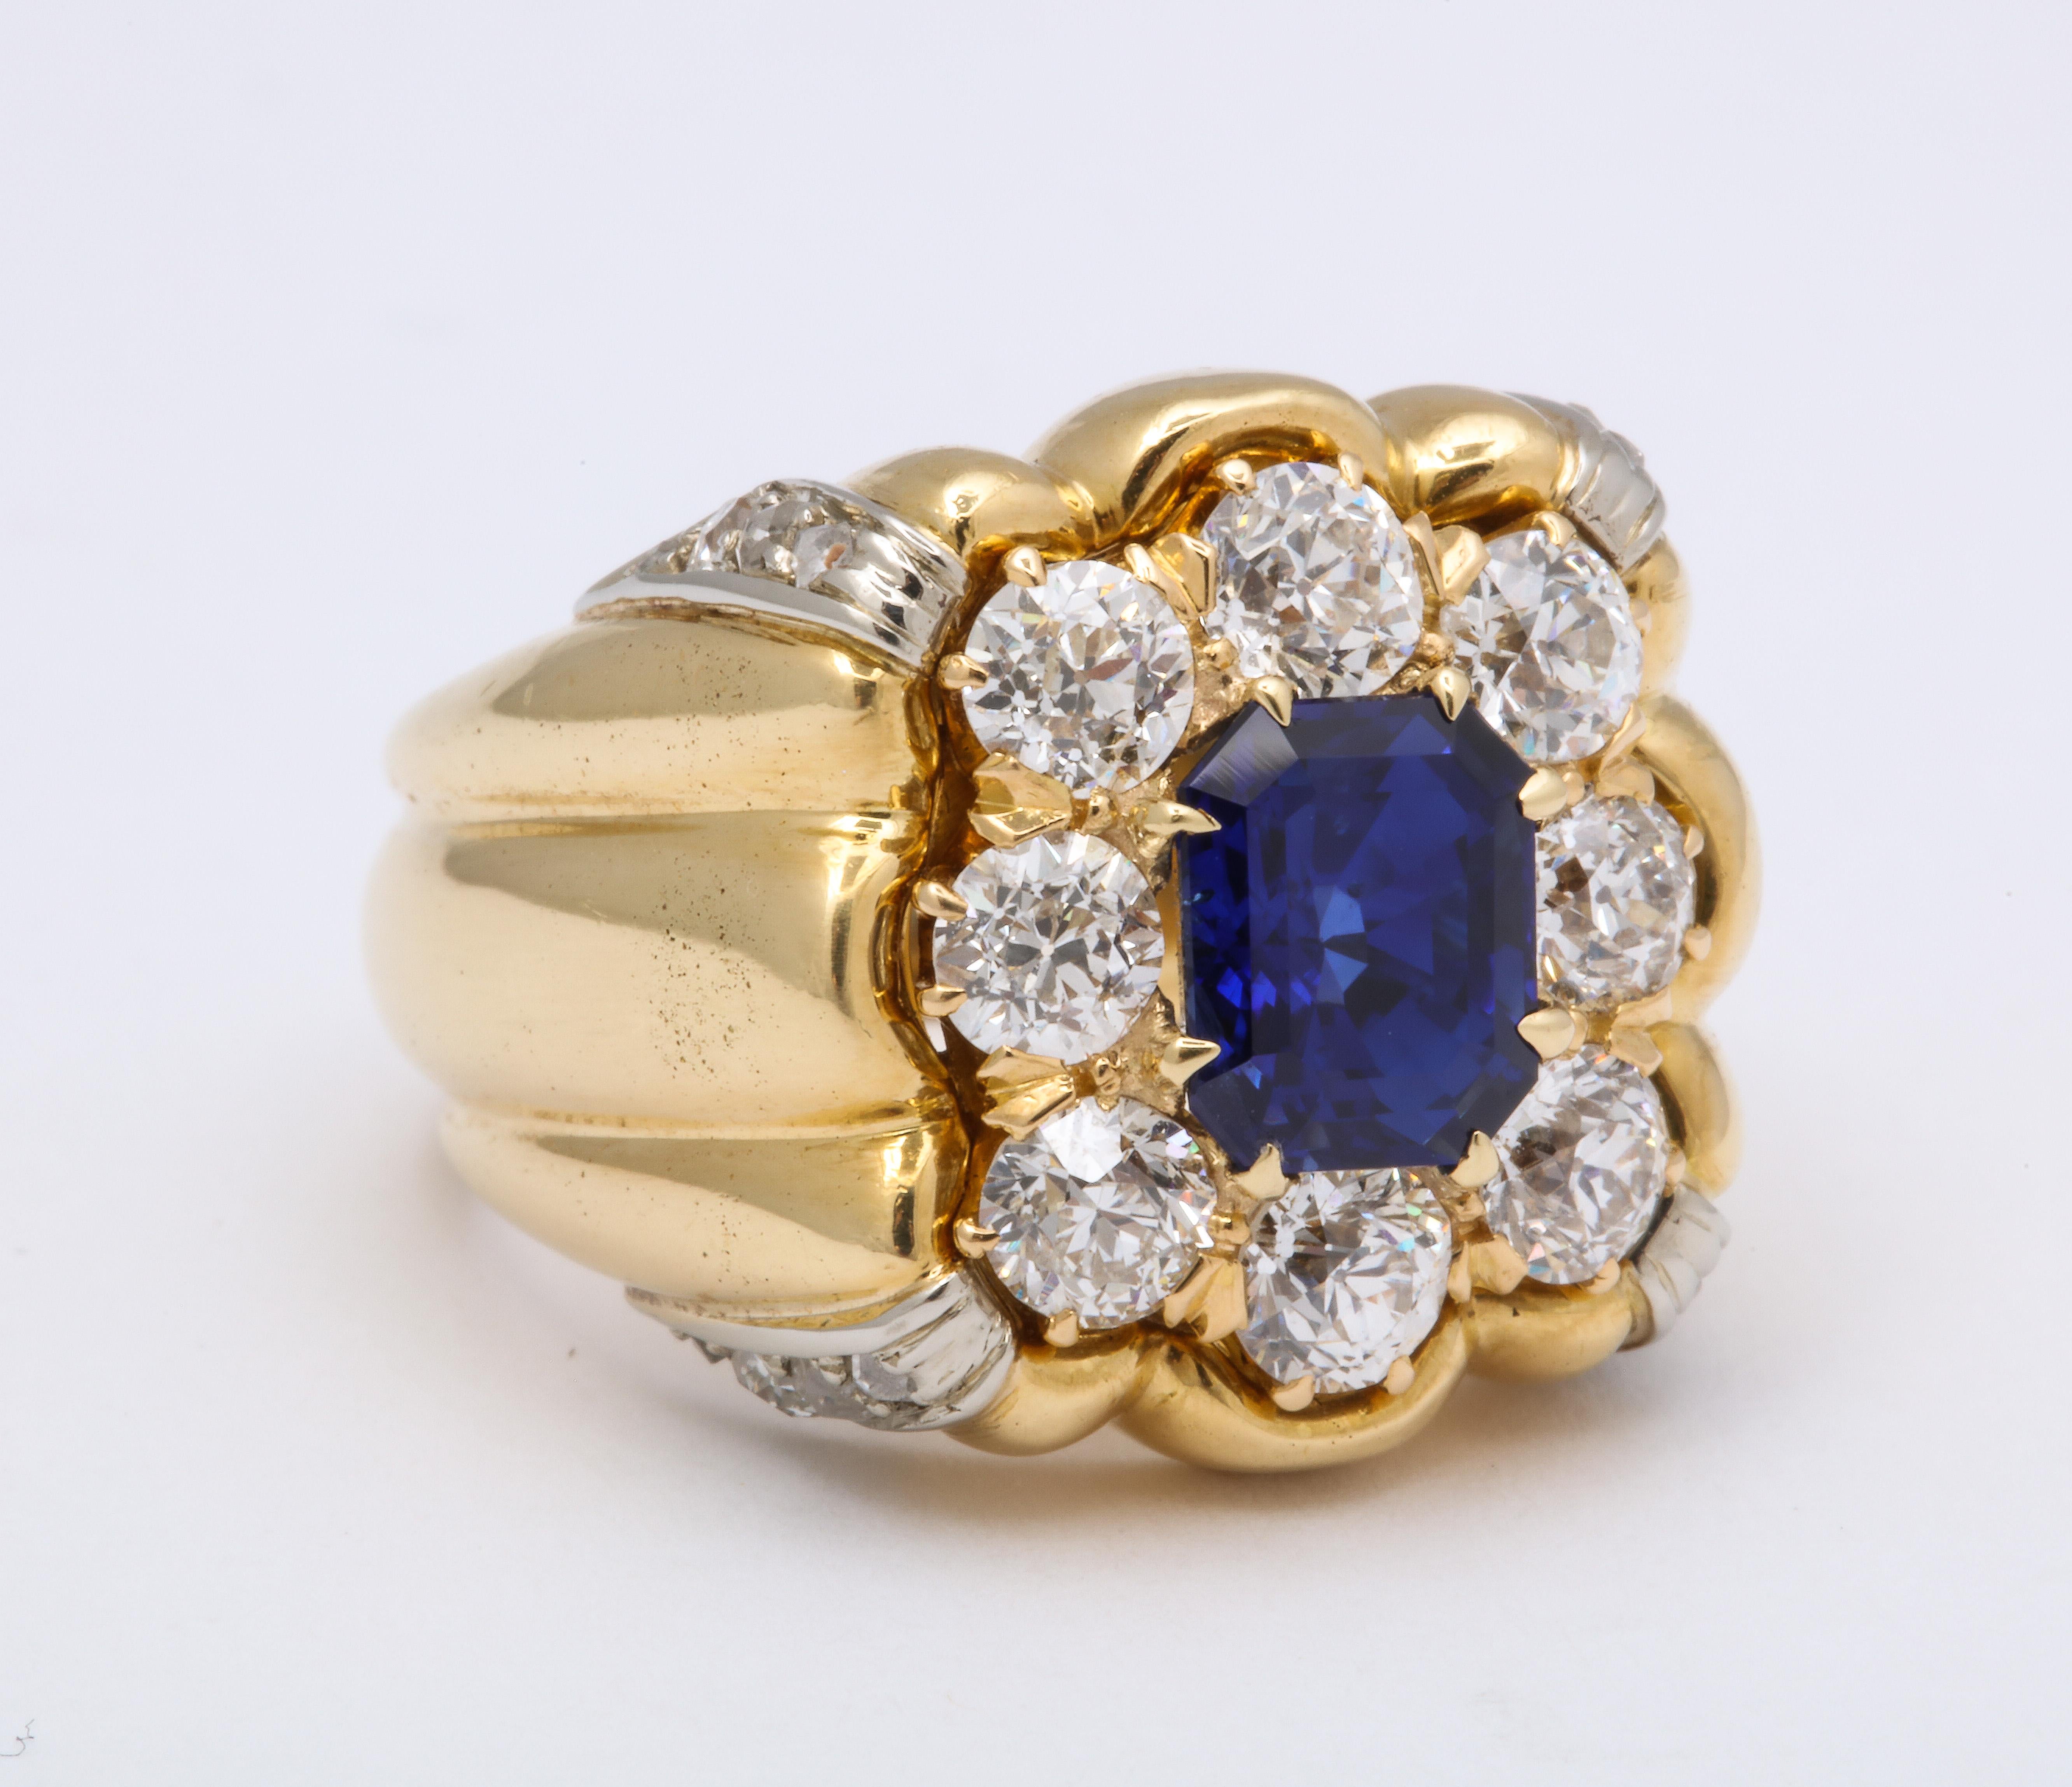 Diamond sapphire yellow gold unisex ring.  The emerald cut sapphire is approximately 2.40 carats. There are 8 full and 12 single cut diamonds totaling 2.15 carats.   3/4 inch w x 3/4 inch high and 3/8 inch deep.

Materials:
18K Yellow Gold, 24